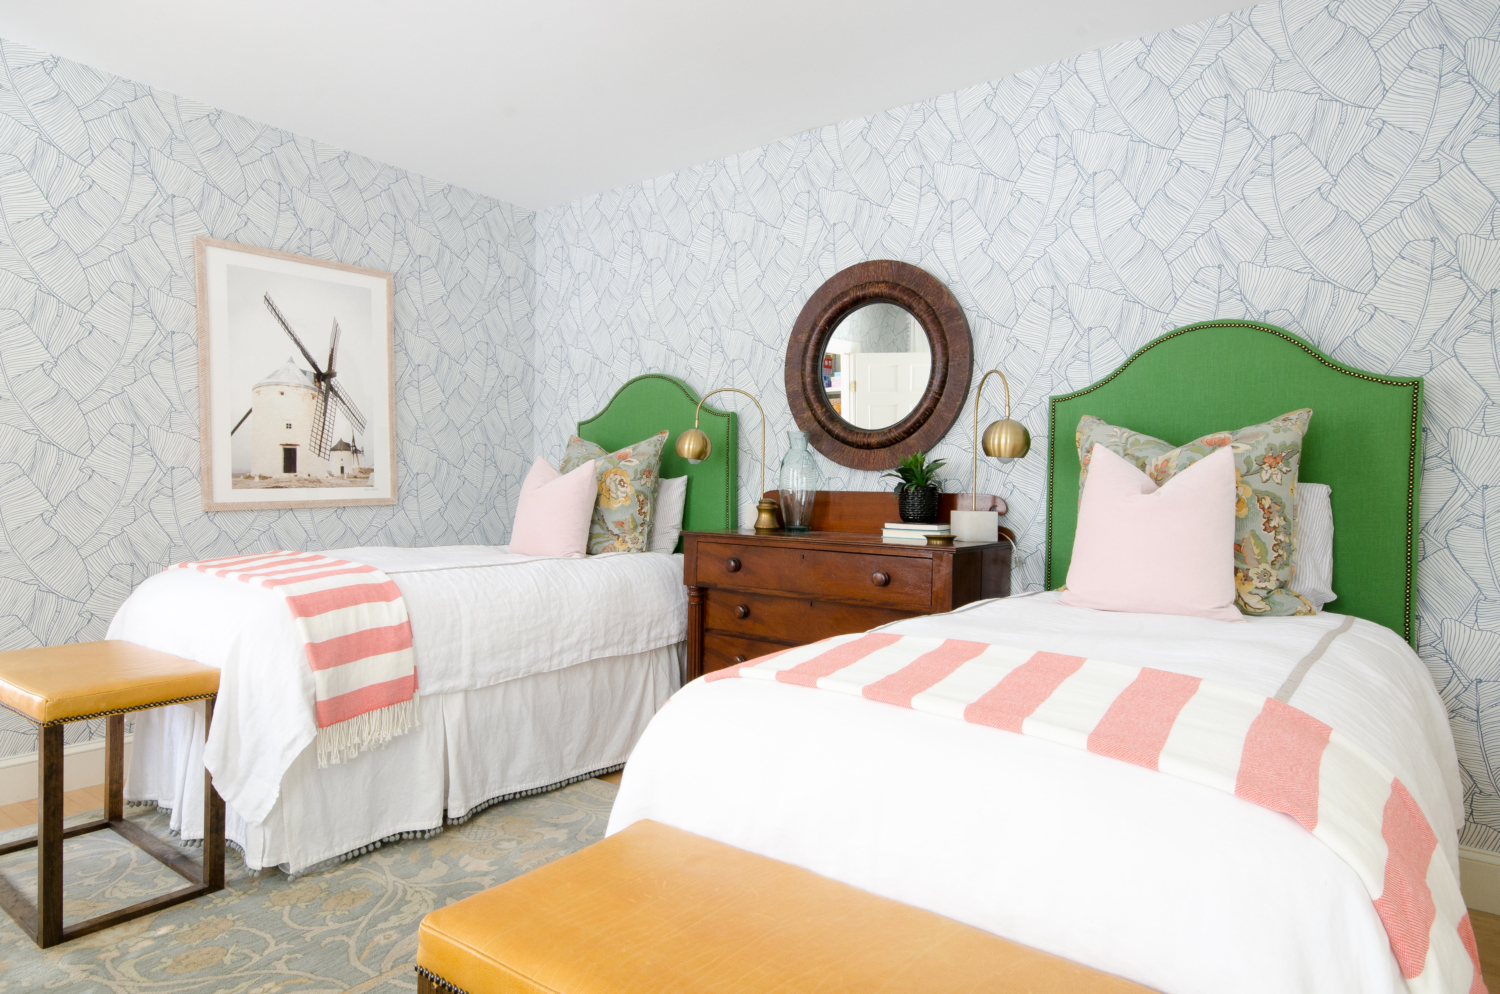 Gorgeous guest room with palm wallpaper, green linen headboards, mustard yellow leather benches, and accents of blush and coral